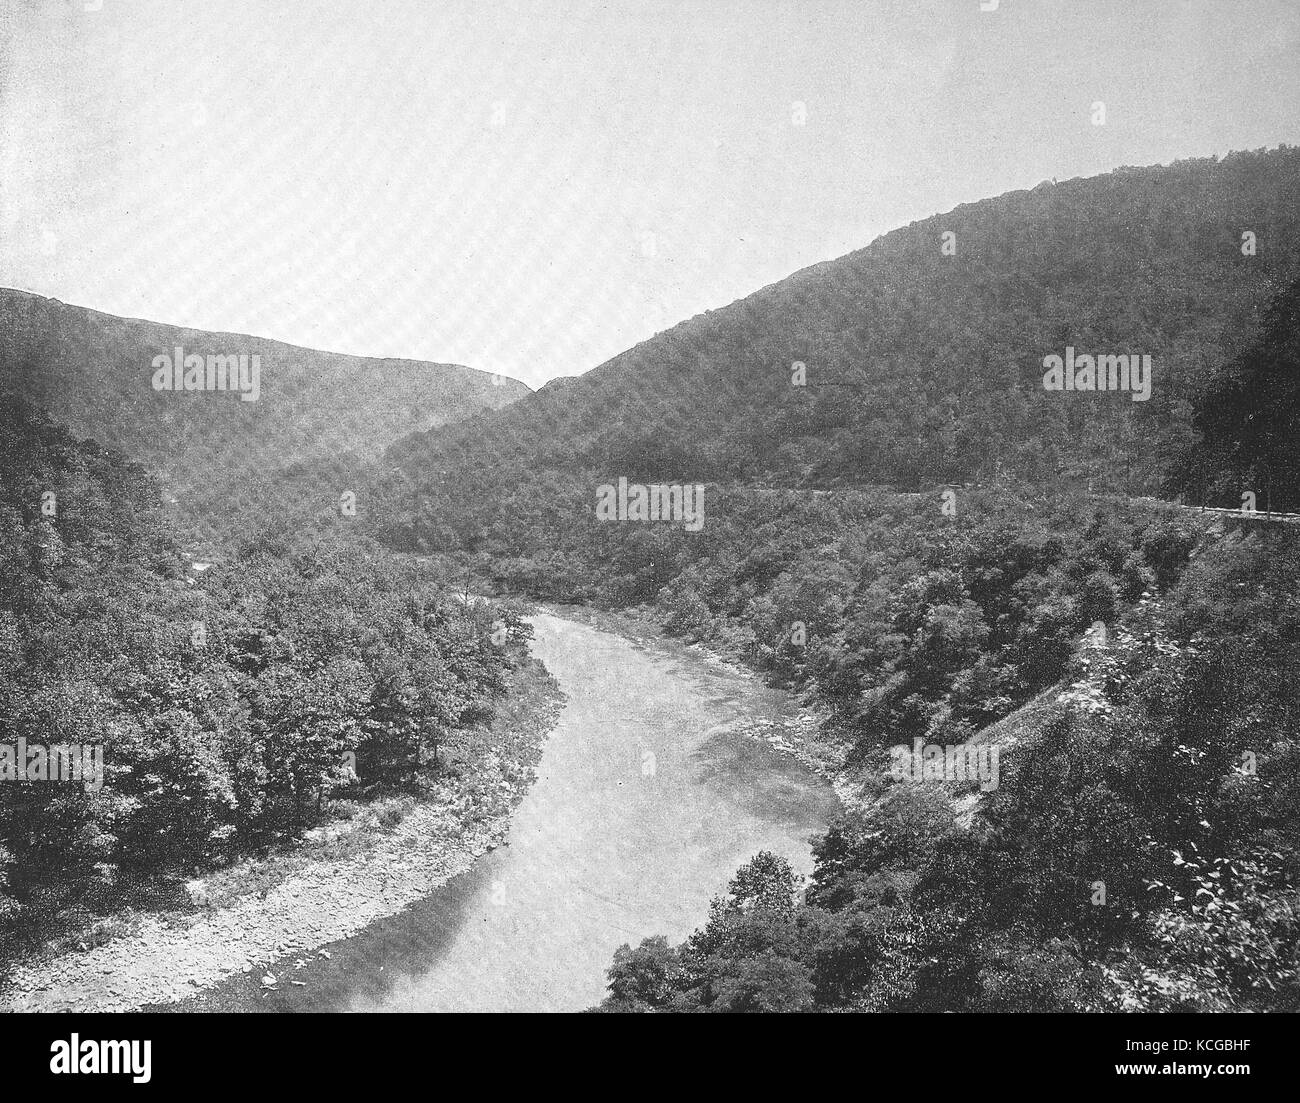 United States of America, landscape on the Pennsylvania railroad, mountains, valley and river along the route, Alleghany Mountains, digital improved reproduction of a historical photo from the (estimated) year 1899 Stock Photo